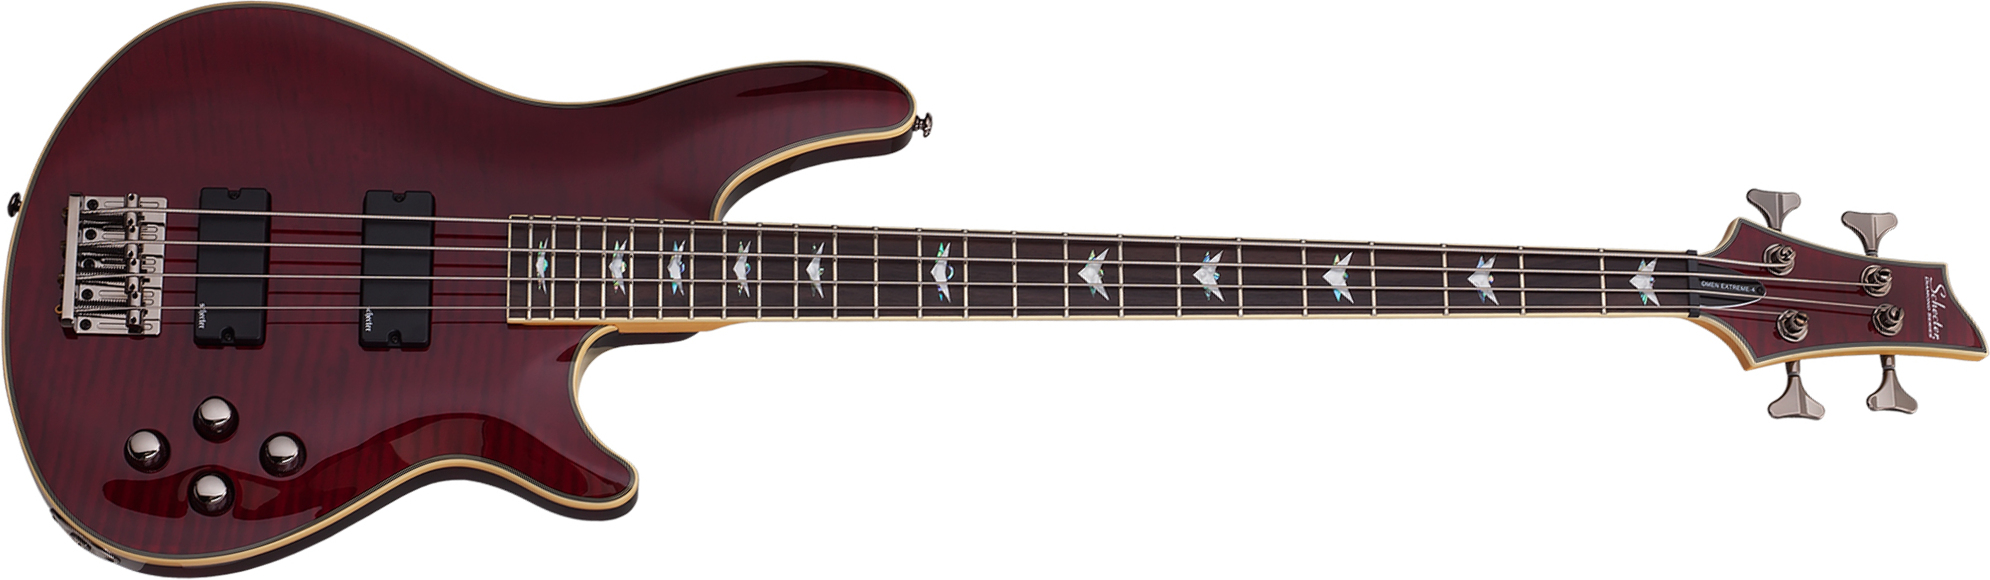 Schecter Omen Extreme-4 Active Rw - Black Cherry - Solid body electric bass - Main picture